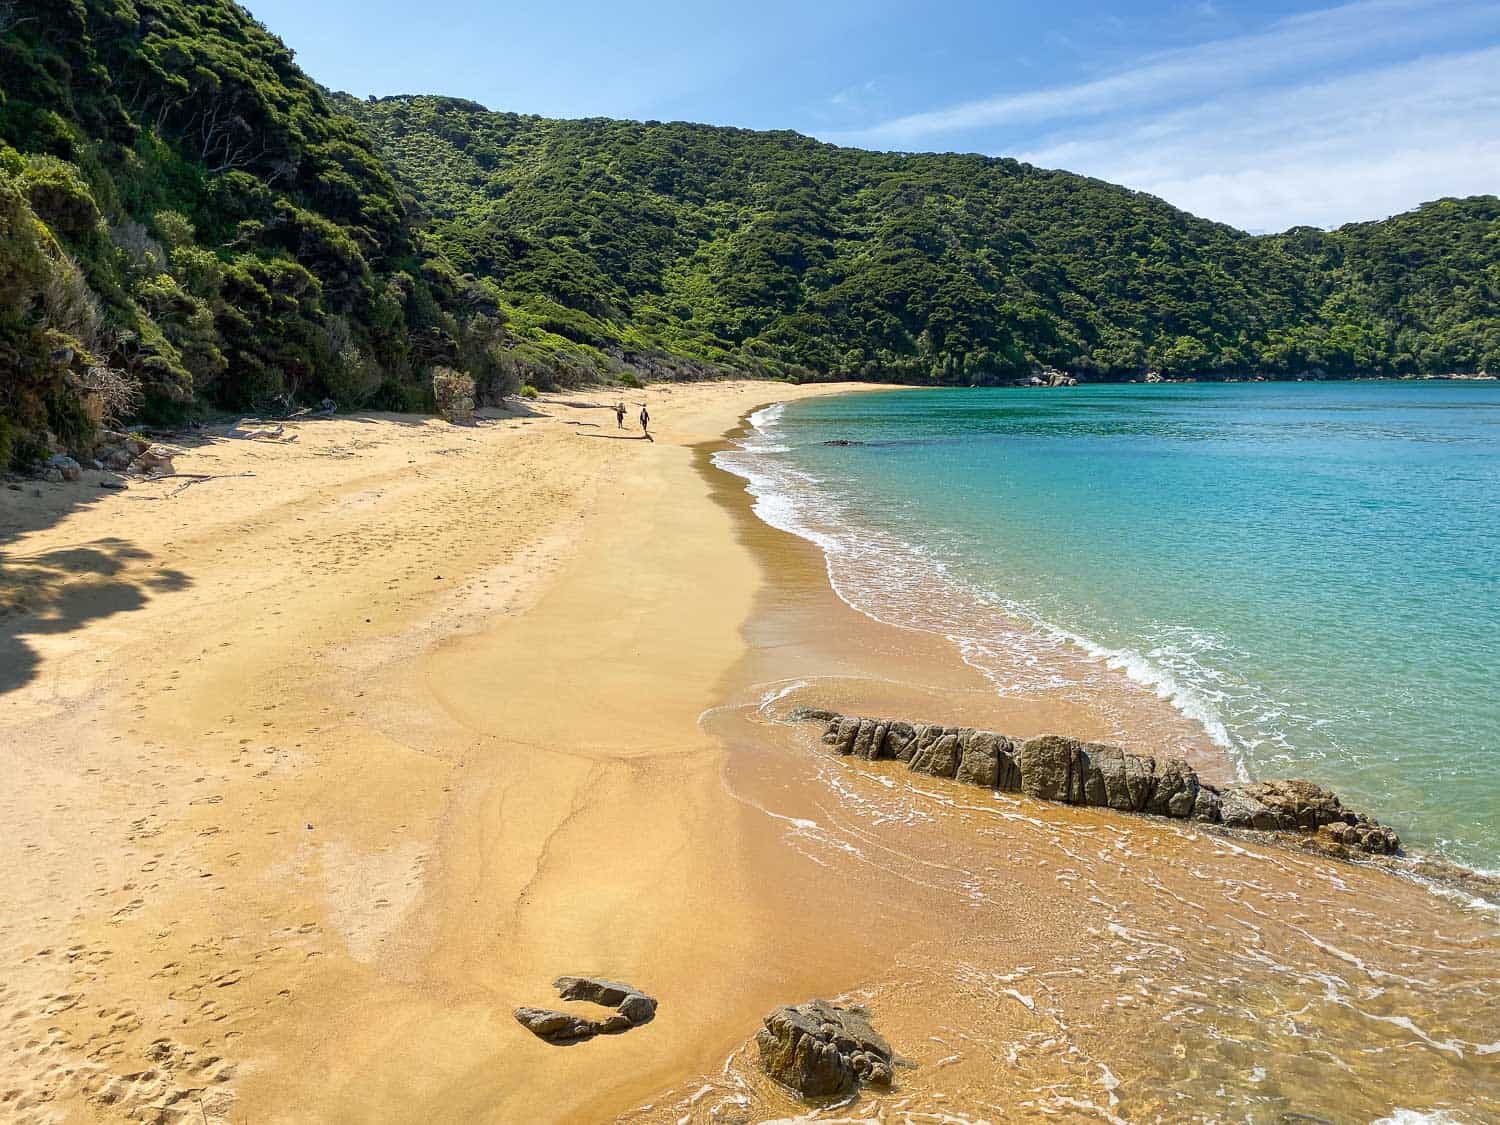 The beach at Mutton Cove, one of the best places to visit on a day trip to Abel Tasman National Park, New Zealand